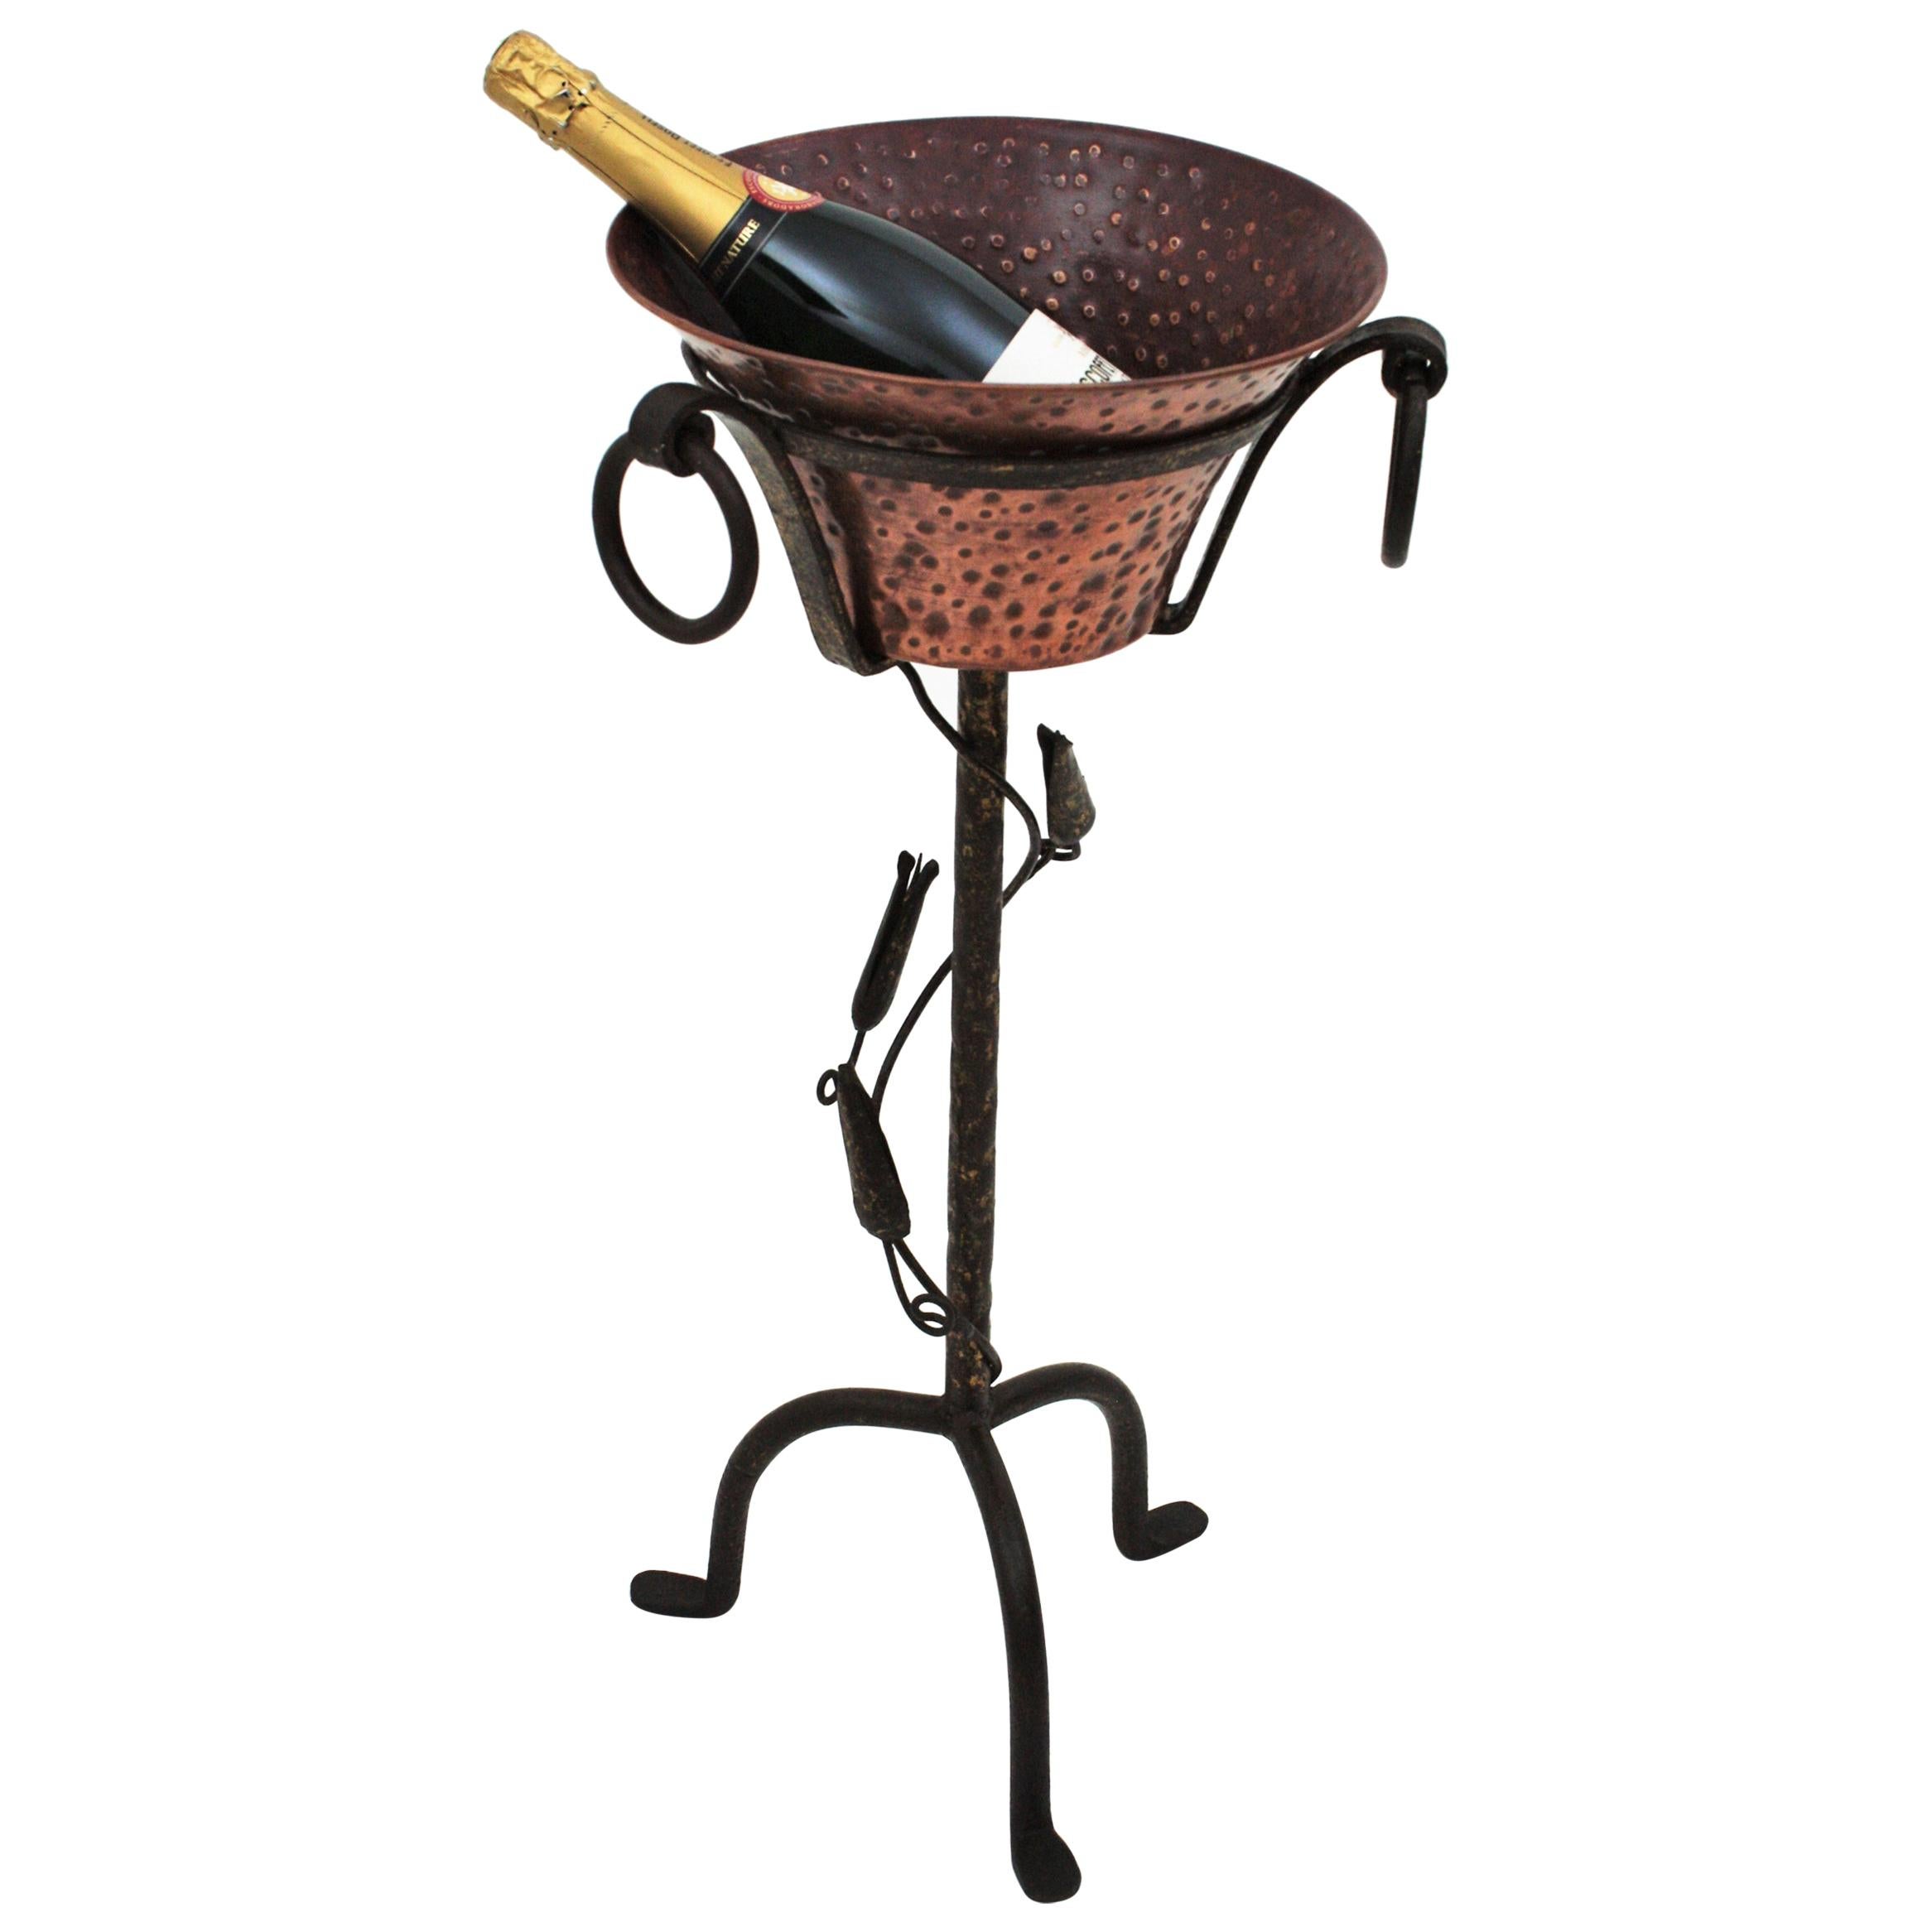 Champagne or Wine Cooler Stand Serving Bucket in Hand Forged Iron and Copper